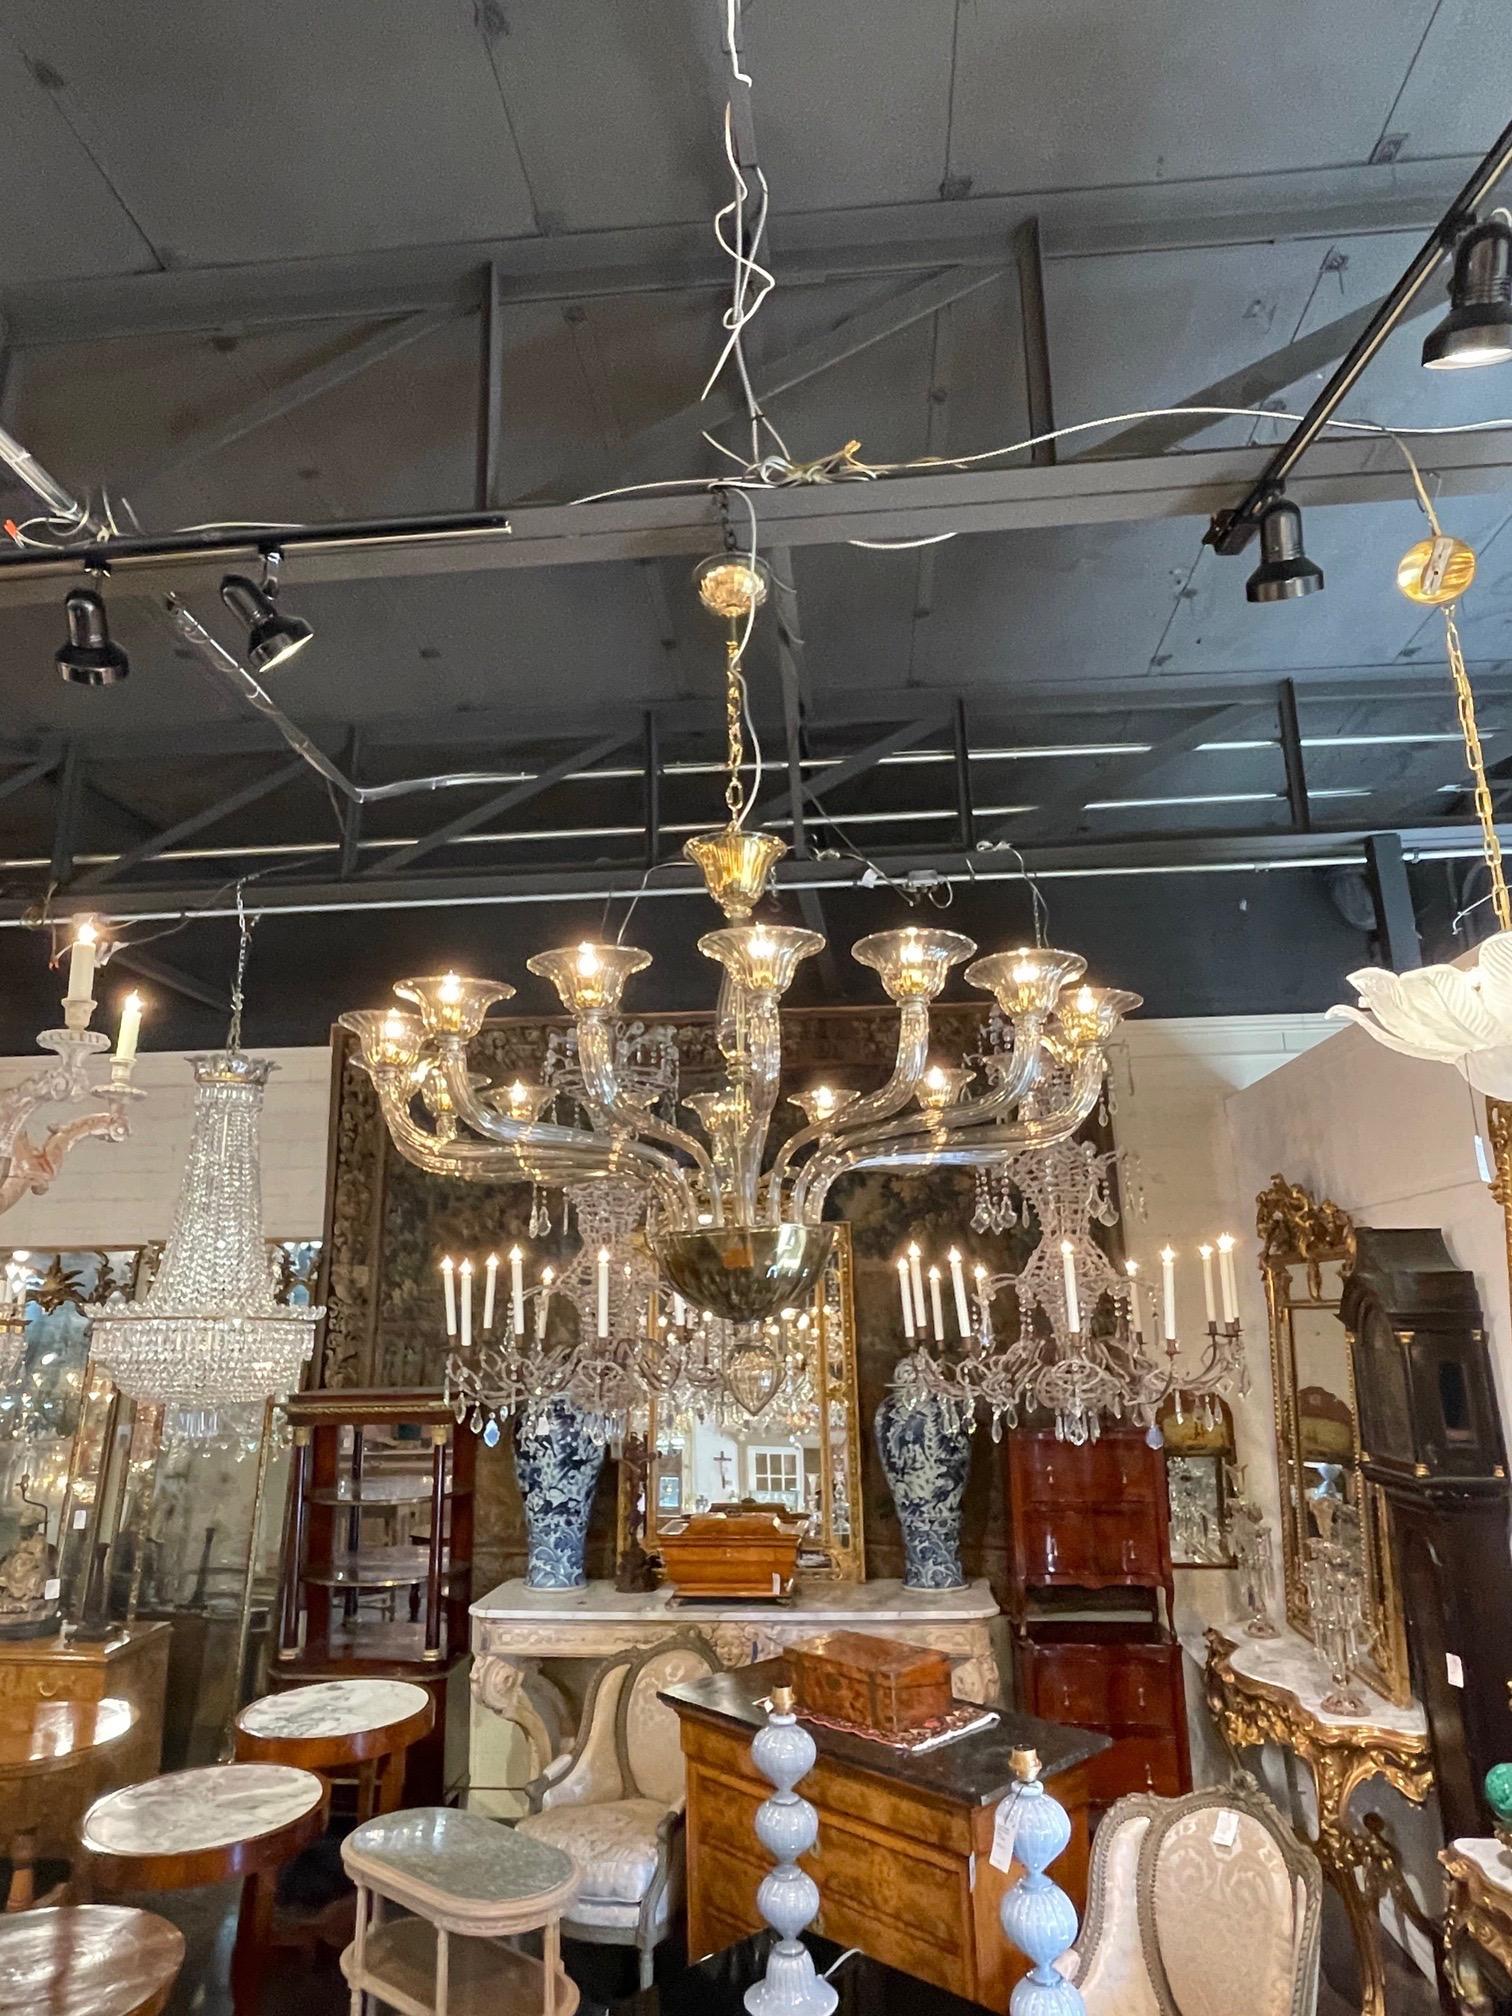 Very impressive large Murano glass chandelier with 16 lights. Featuring a smoke colored glass with a brass interior. Creates a huge presence. Fabulous!